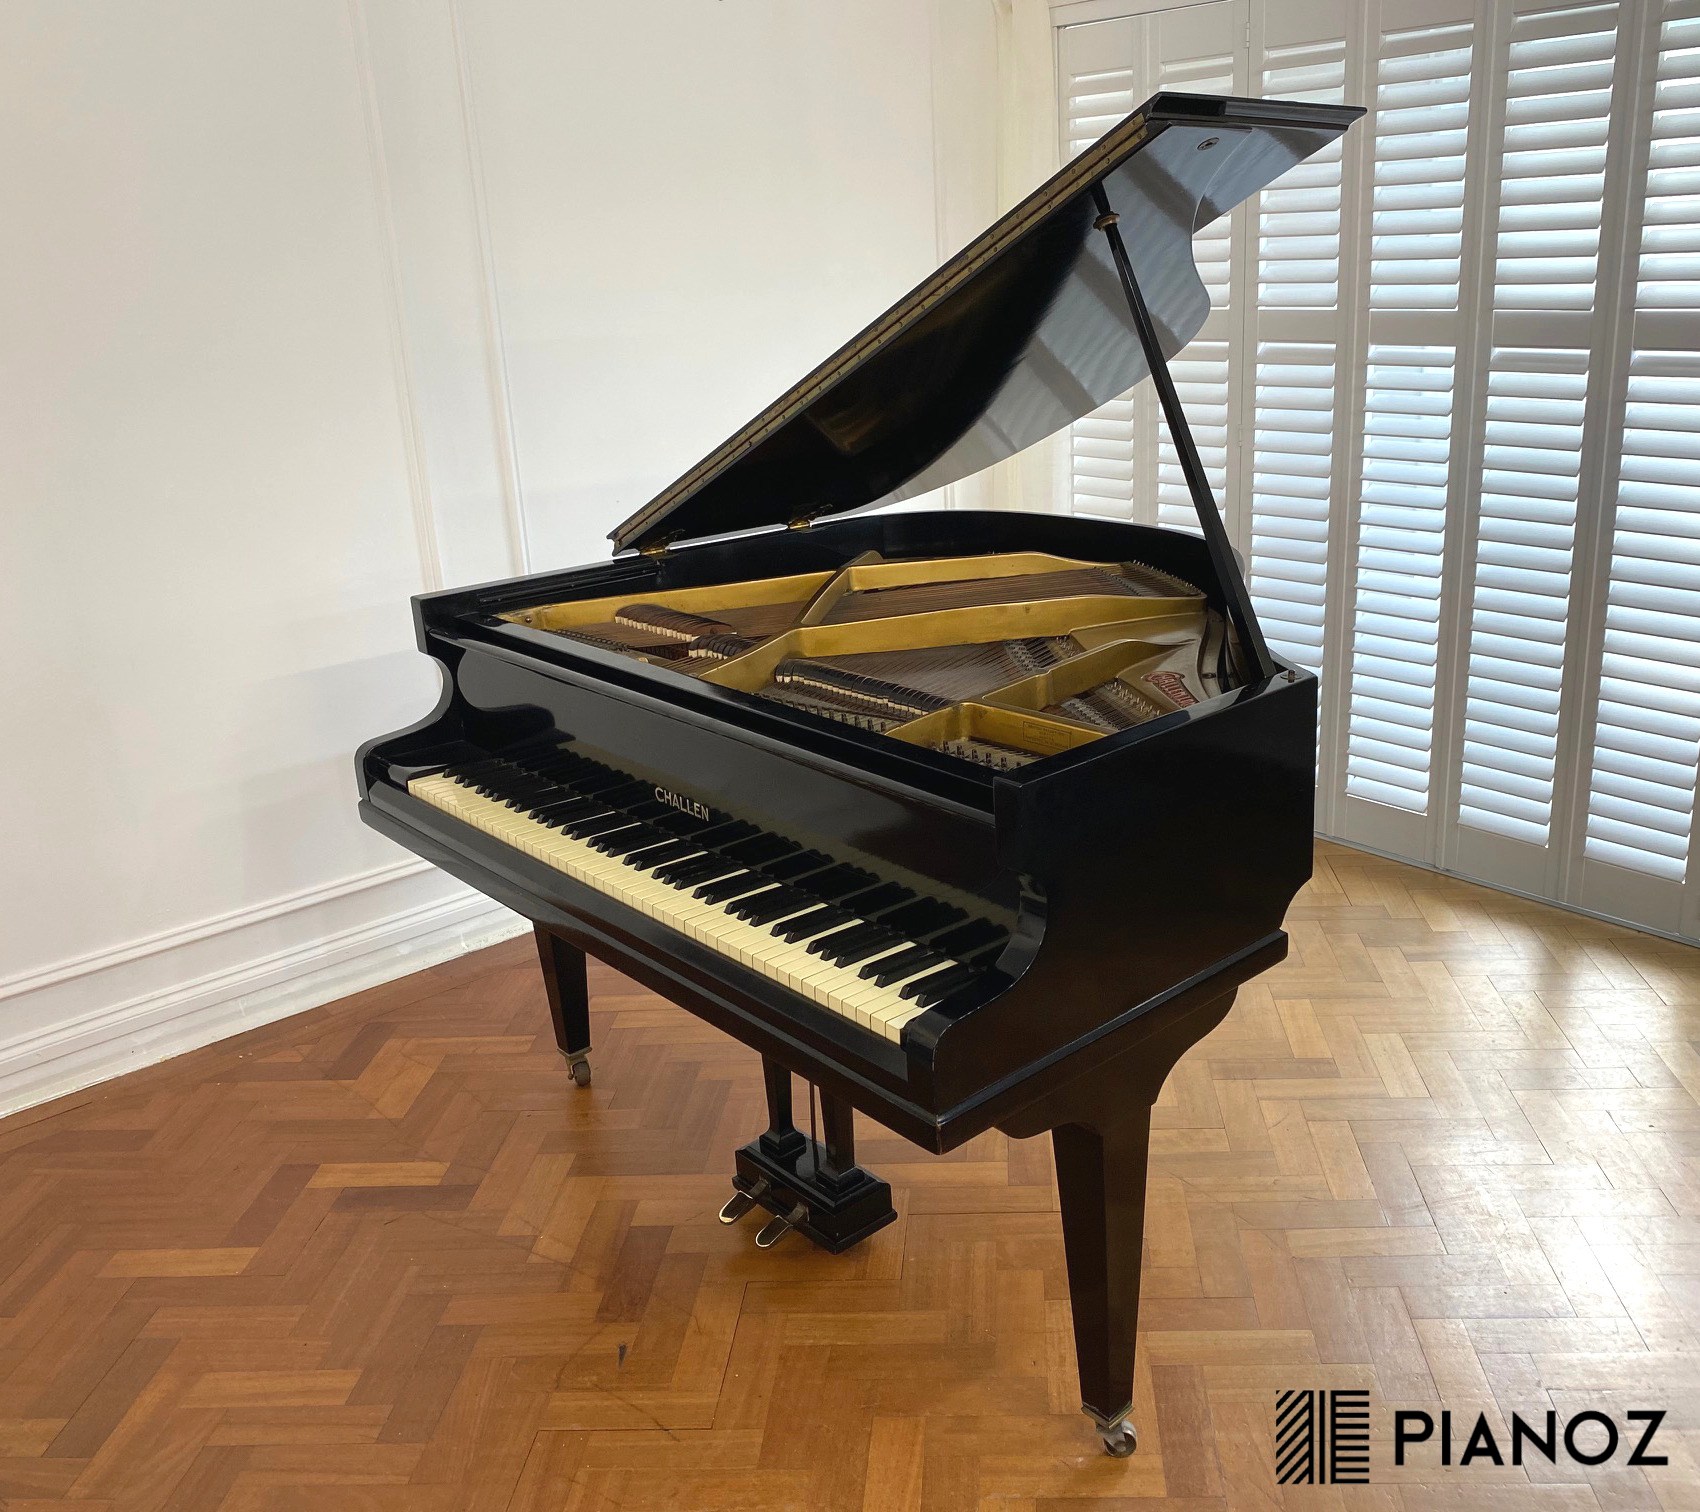 Chappell Black Baby Grand Piano piano for sale in UK